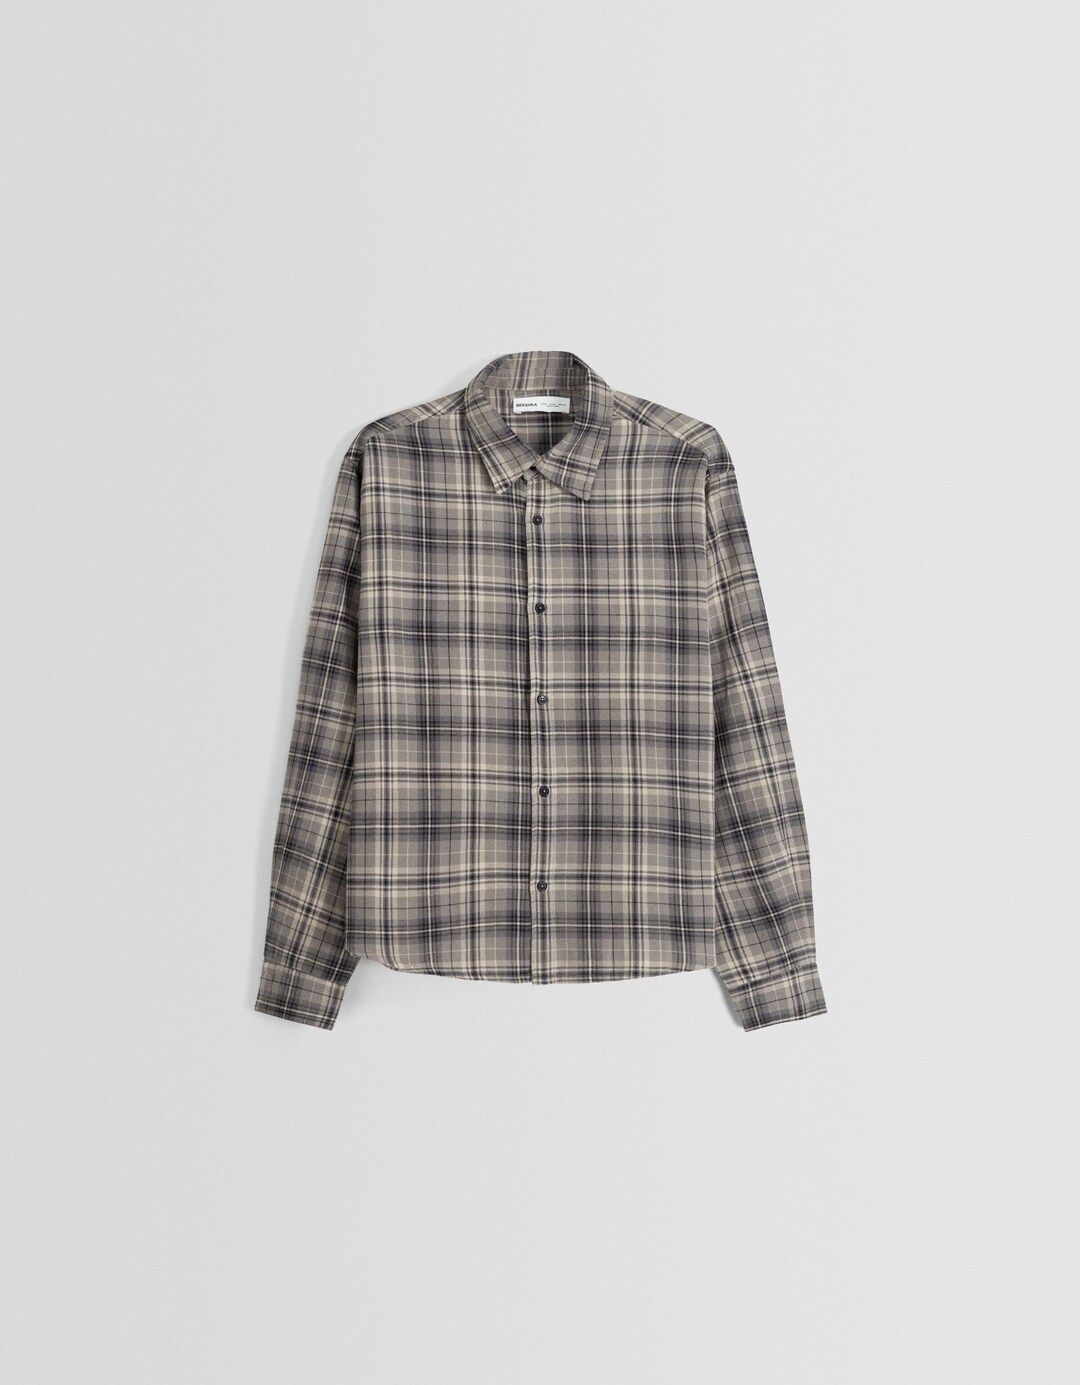 Faded-effect long sleeve check shirt